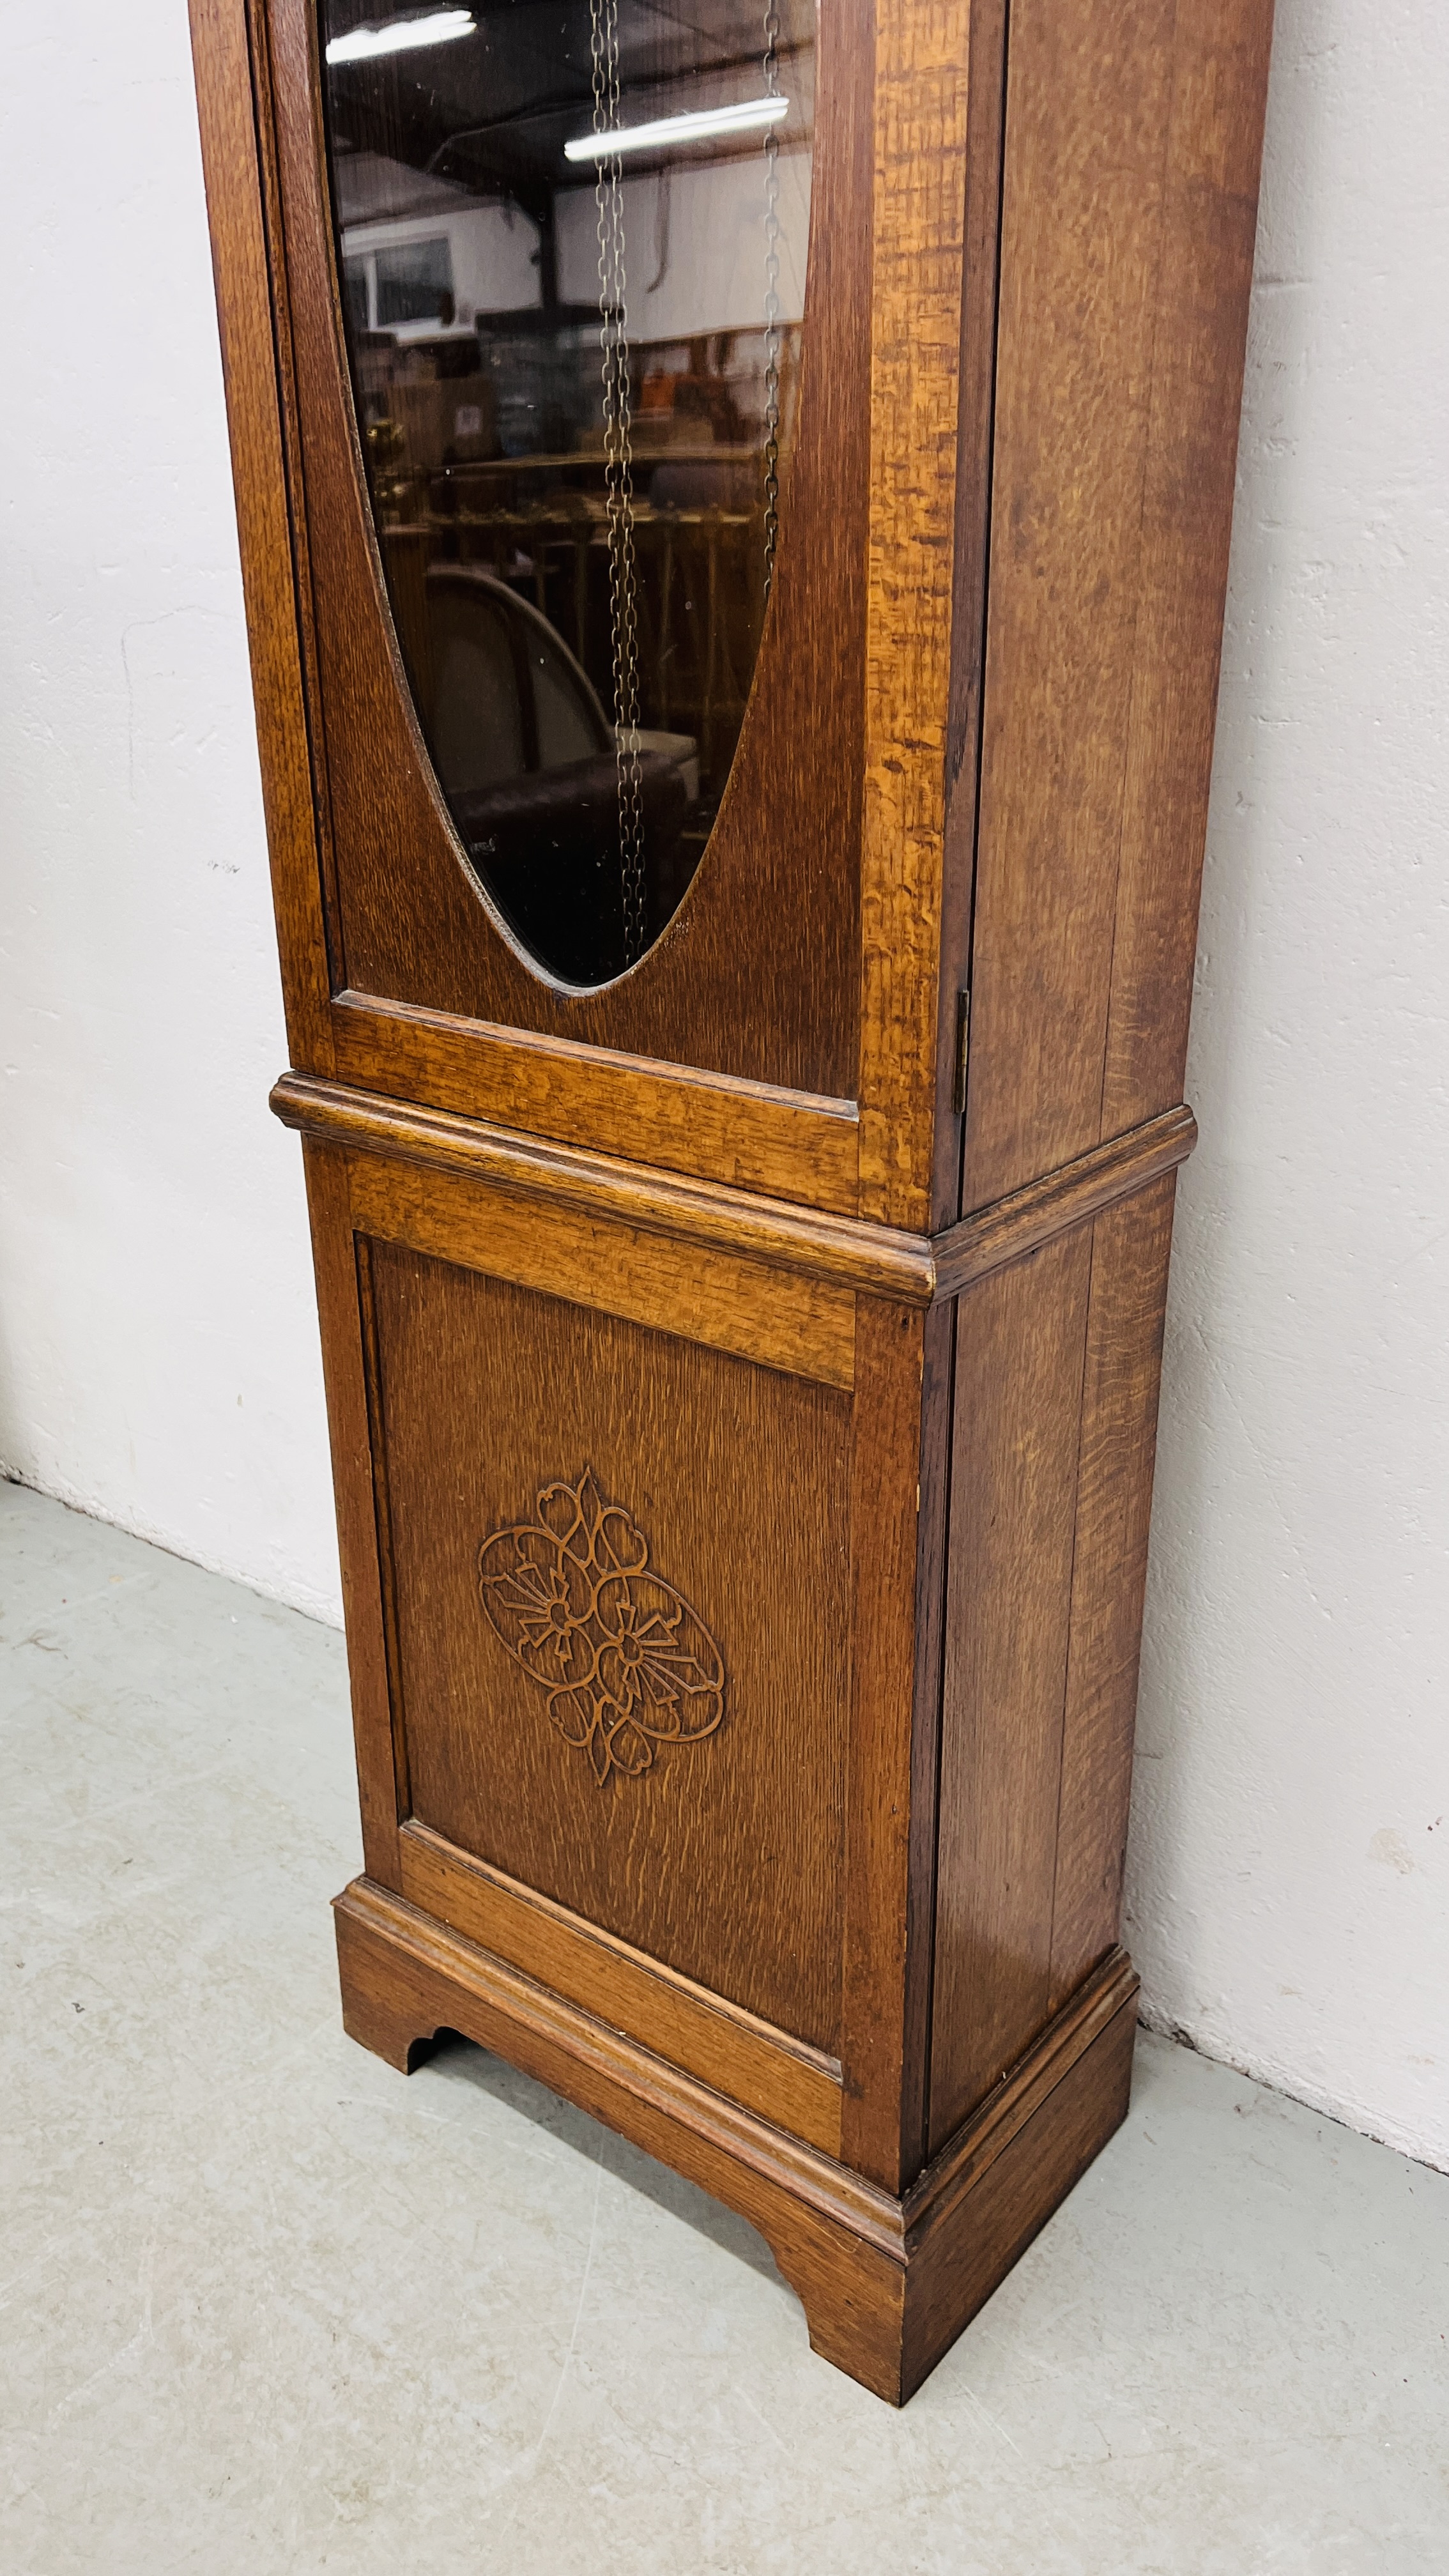 A GERMAN 1930's OAK CASED LONG CASE CLOCK WITH WESTMINSTER CHIME. - Image 5 of 8